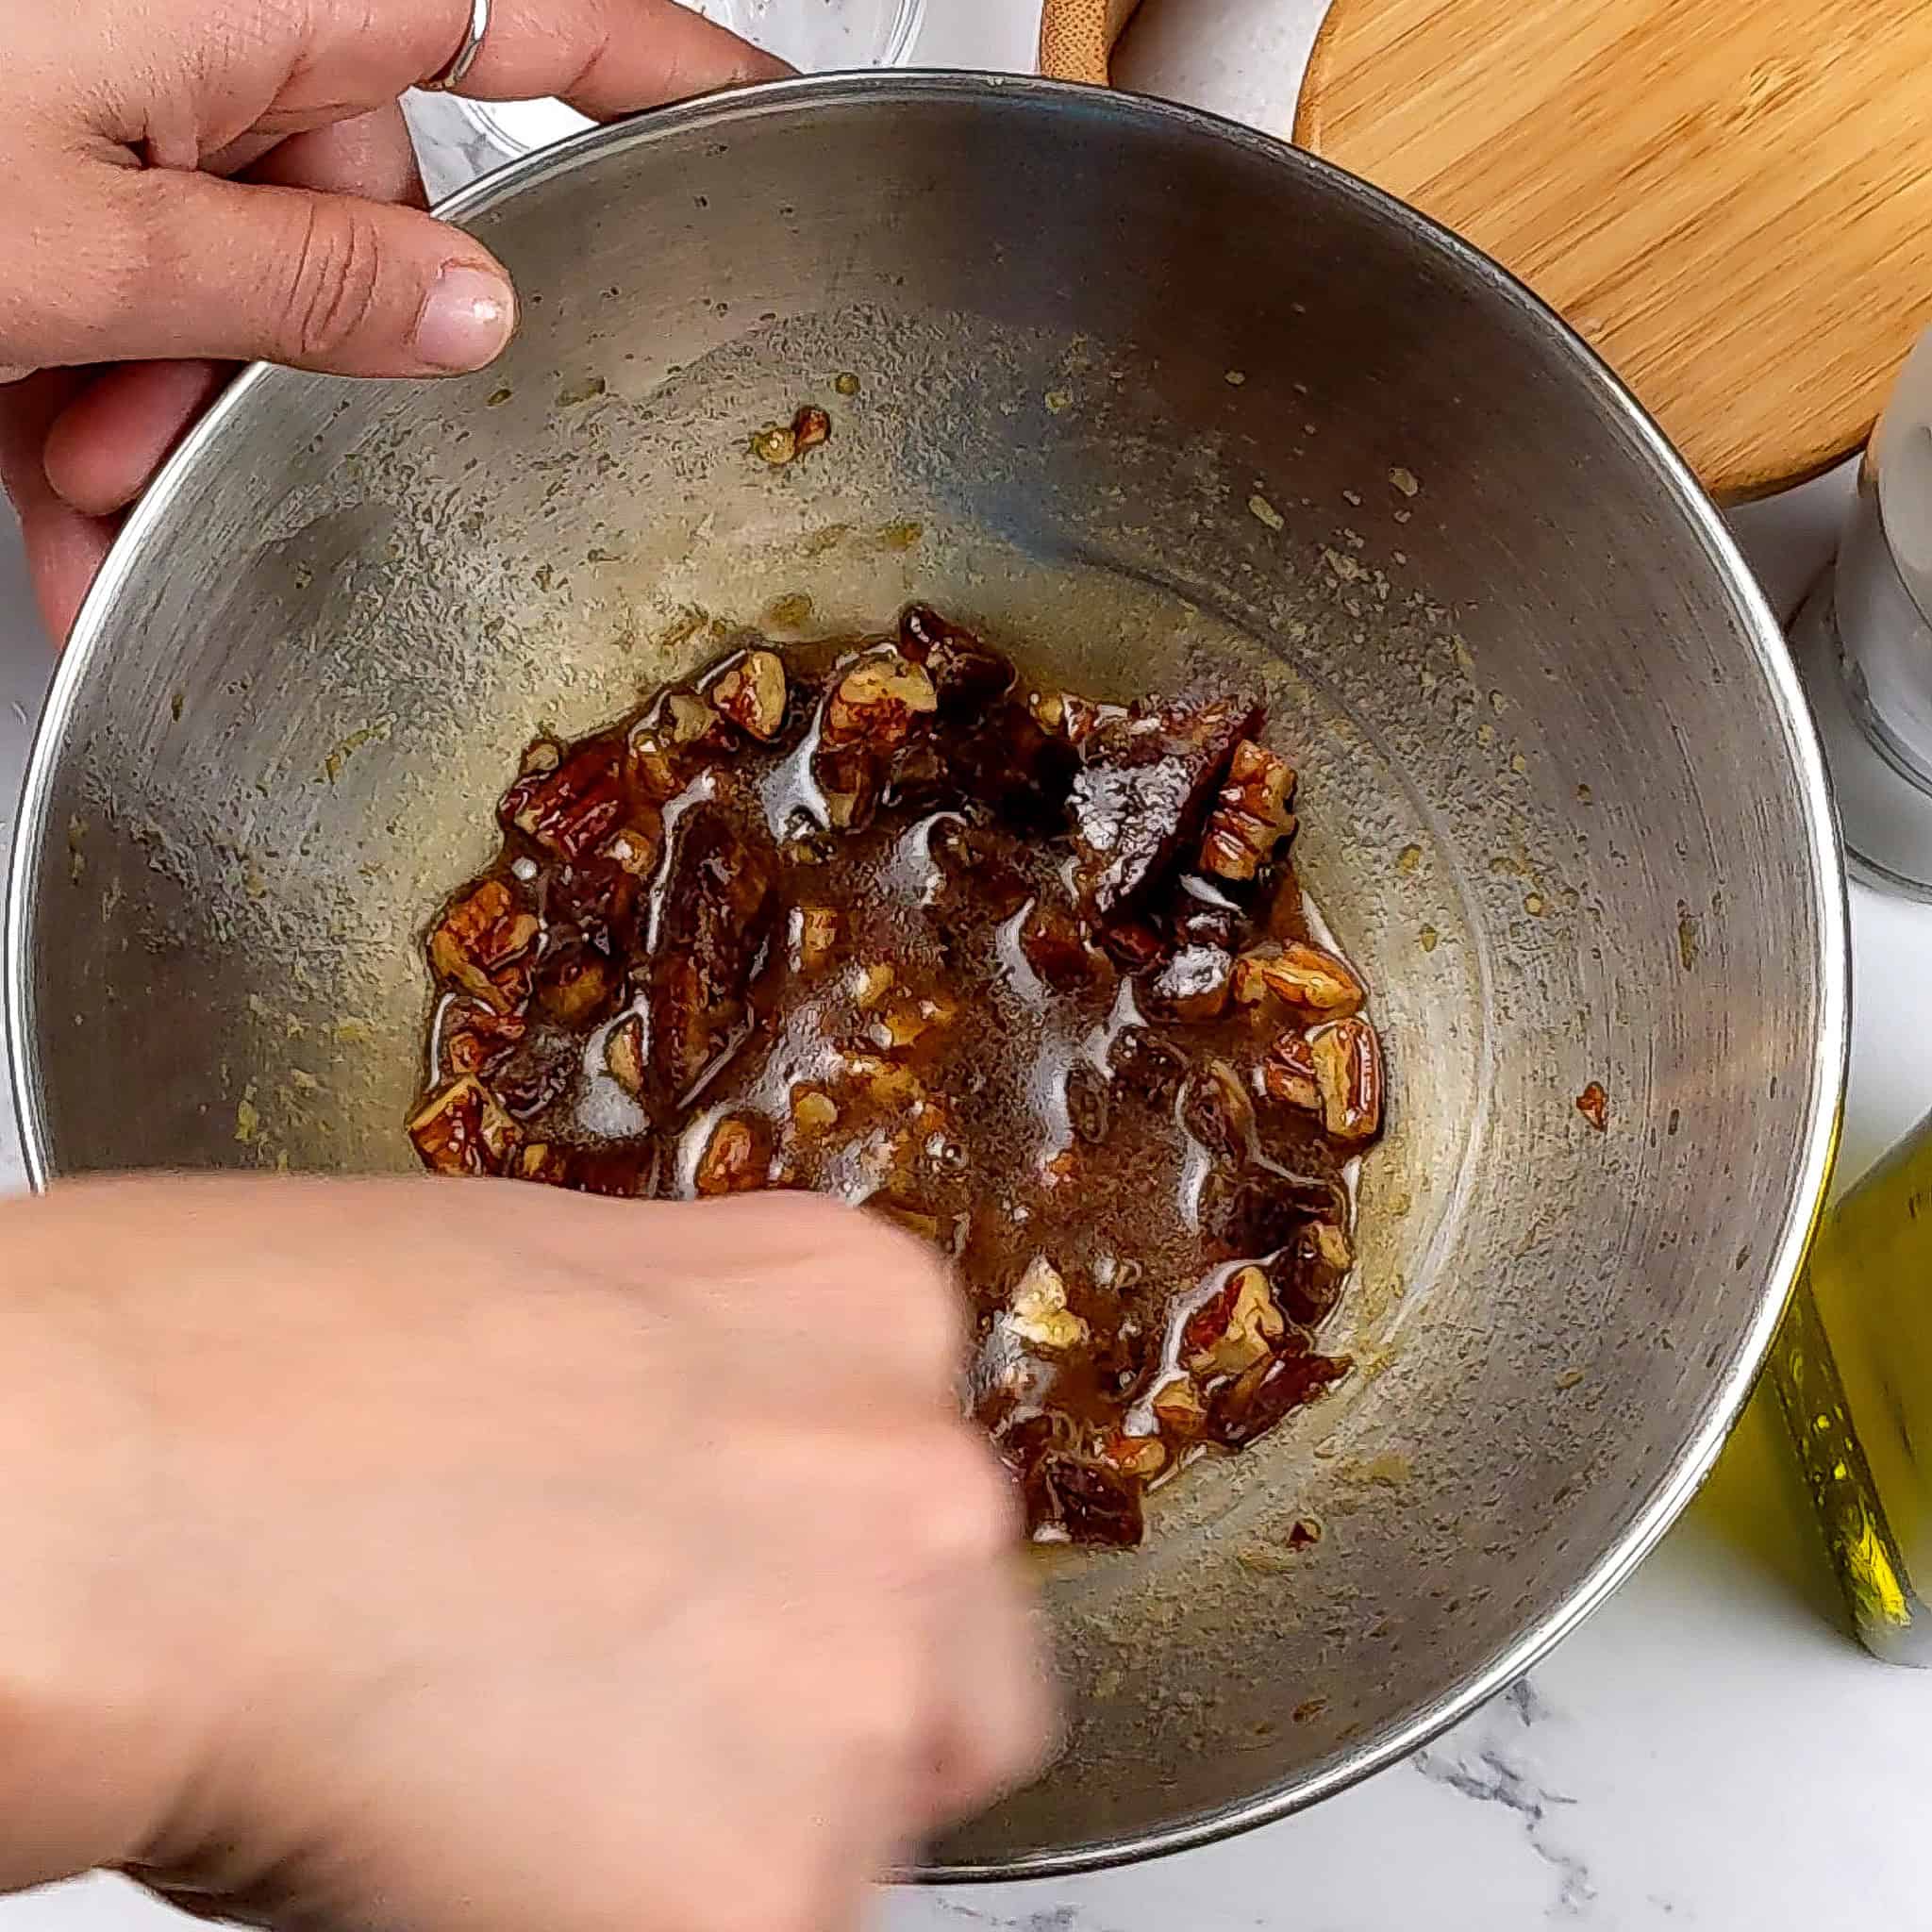 the pomegranate vinaigrette combined with pecans and dates in a stainless steel bowl.